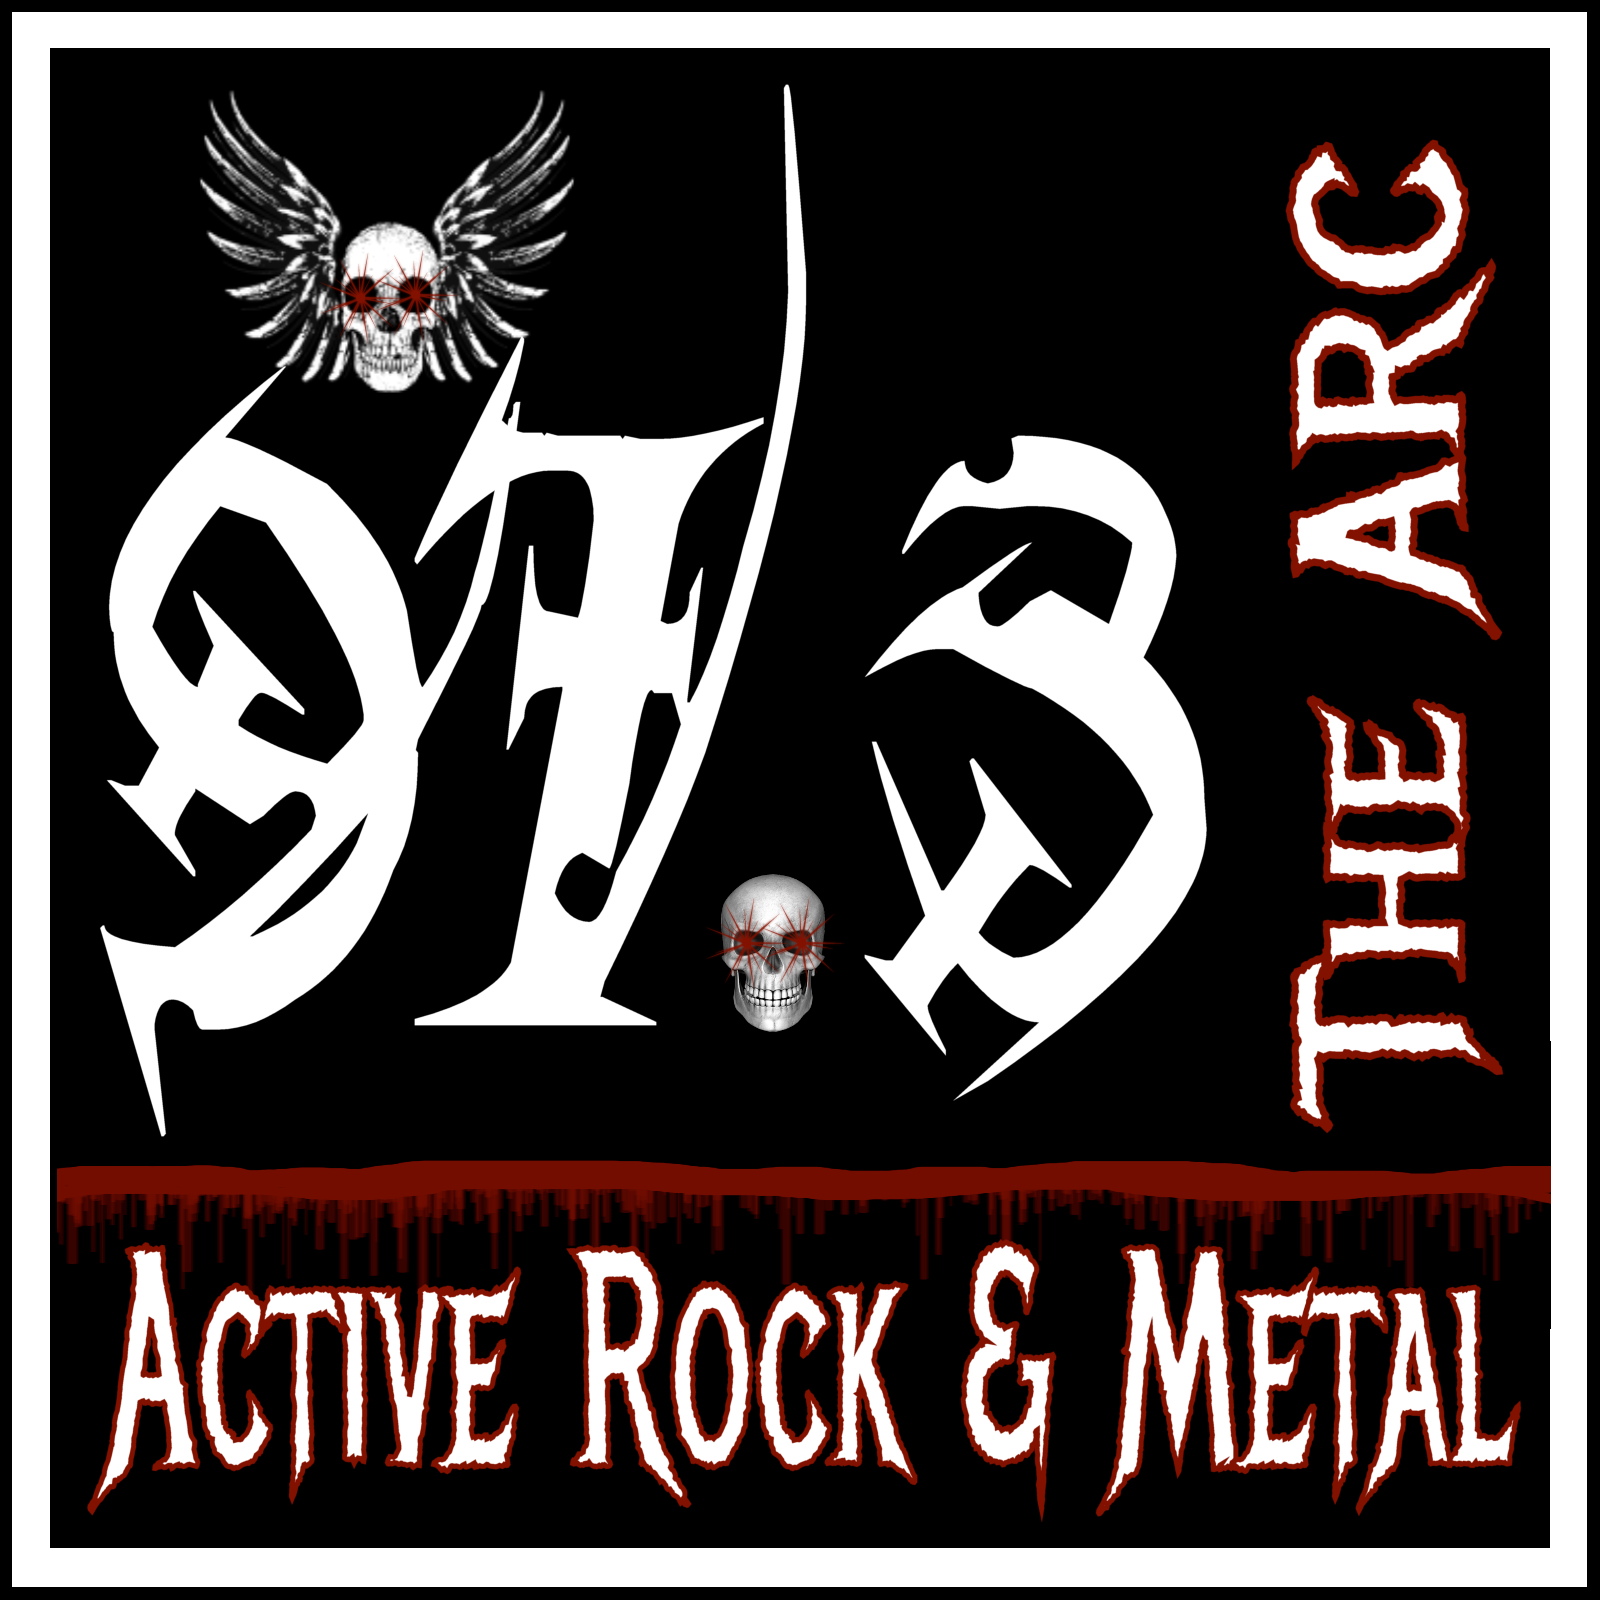 Art for 20 YEARS BROADCASTING KICK ASS ROCK & METAL by 97.3 The ARC